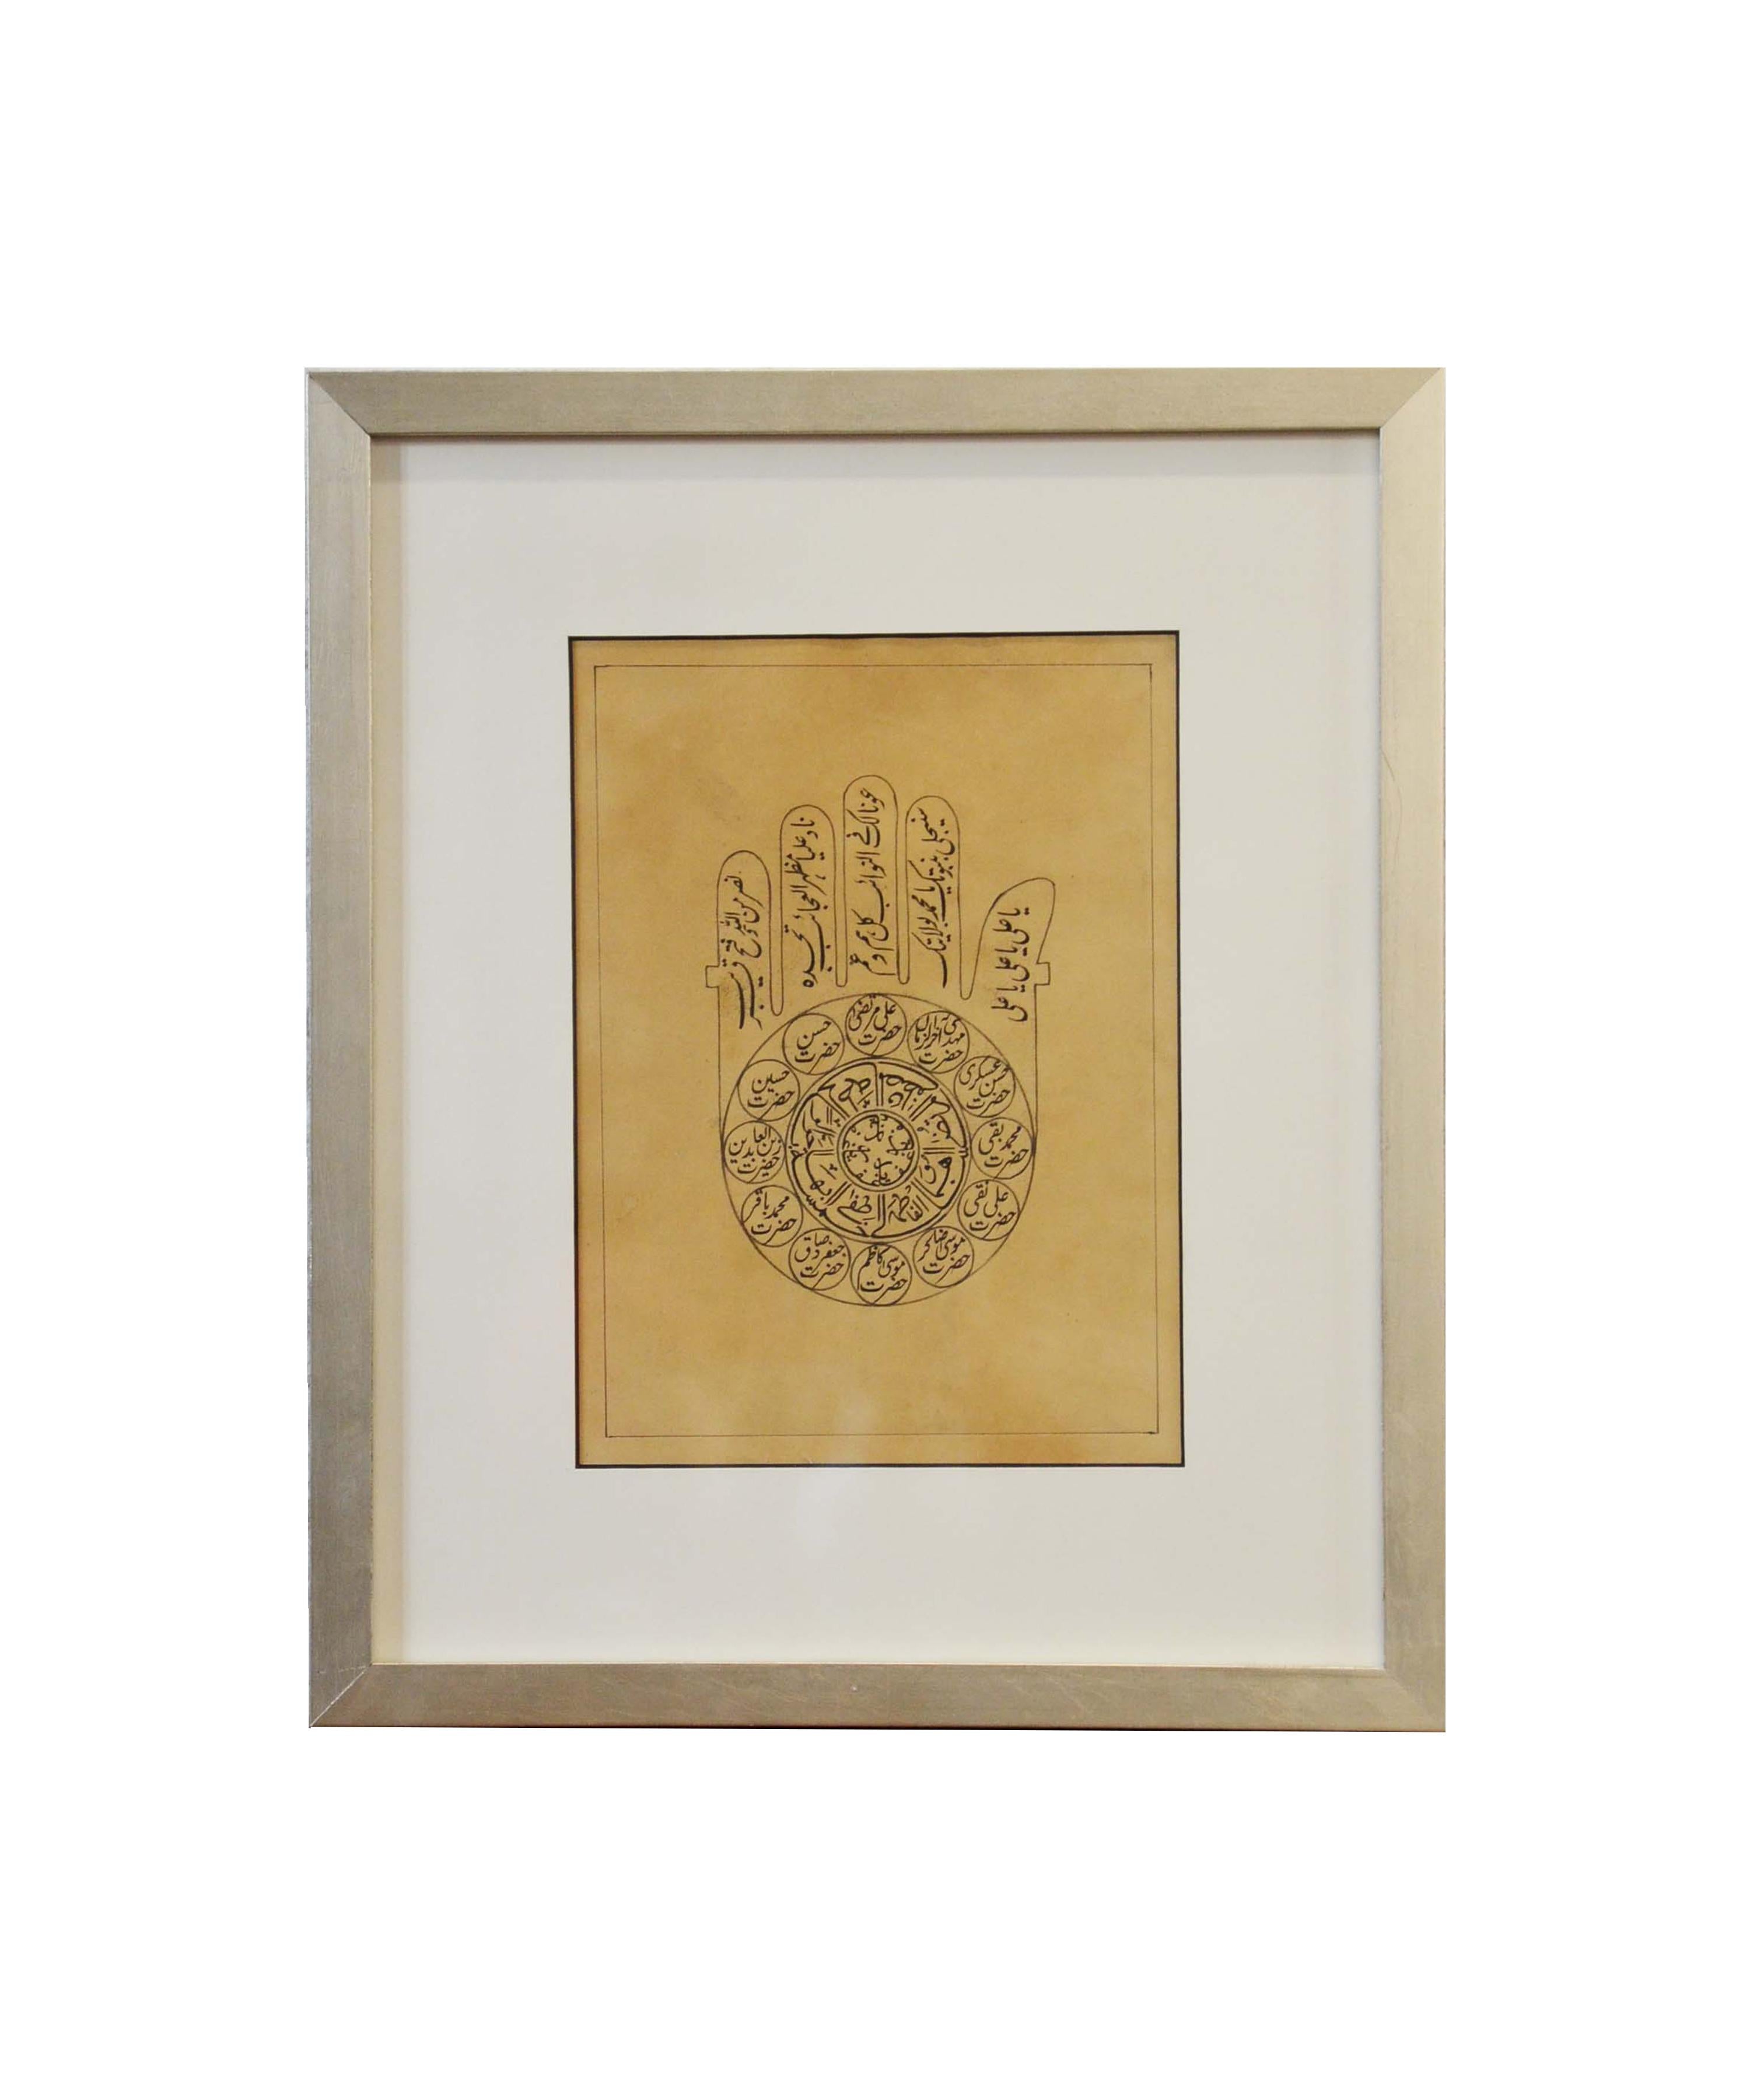 An astrological print depicting a hand with calligraphy from the mid 20th century, hand-painted on parchment. Found in Japan, this print attracts our attention with its depiction of a single hand adorned with calligraphy on the fingers and palm.